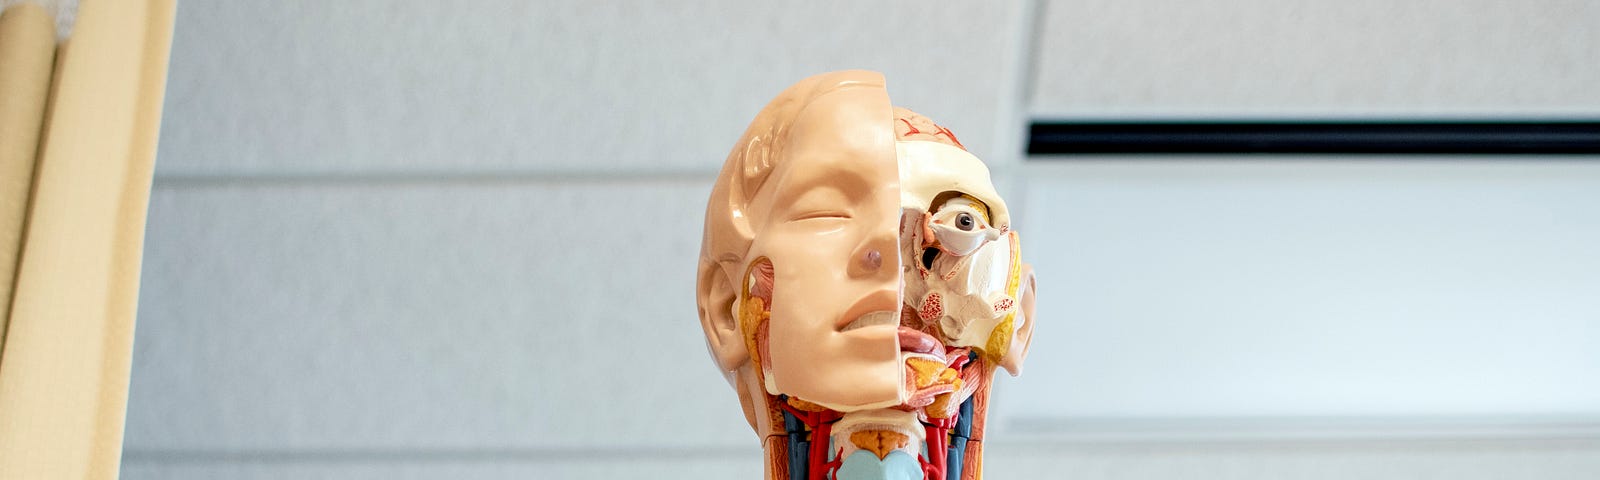 An image of a plastic human anatomy model showing half a human face and half a skull with the various organs and veins exposed.